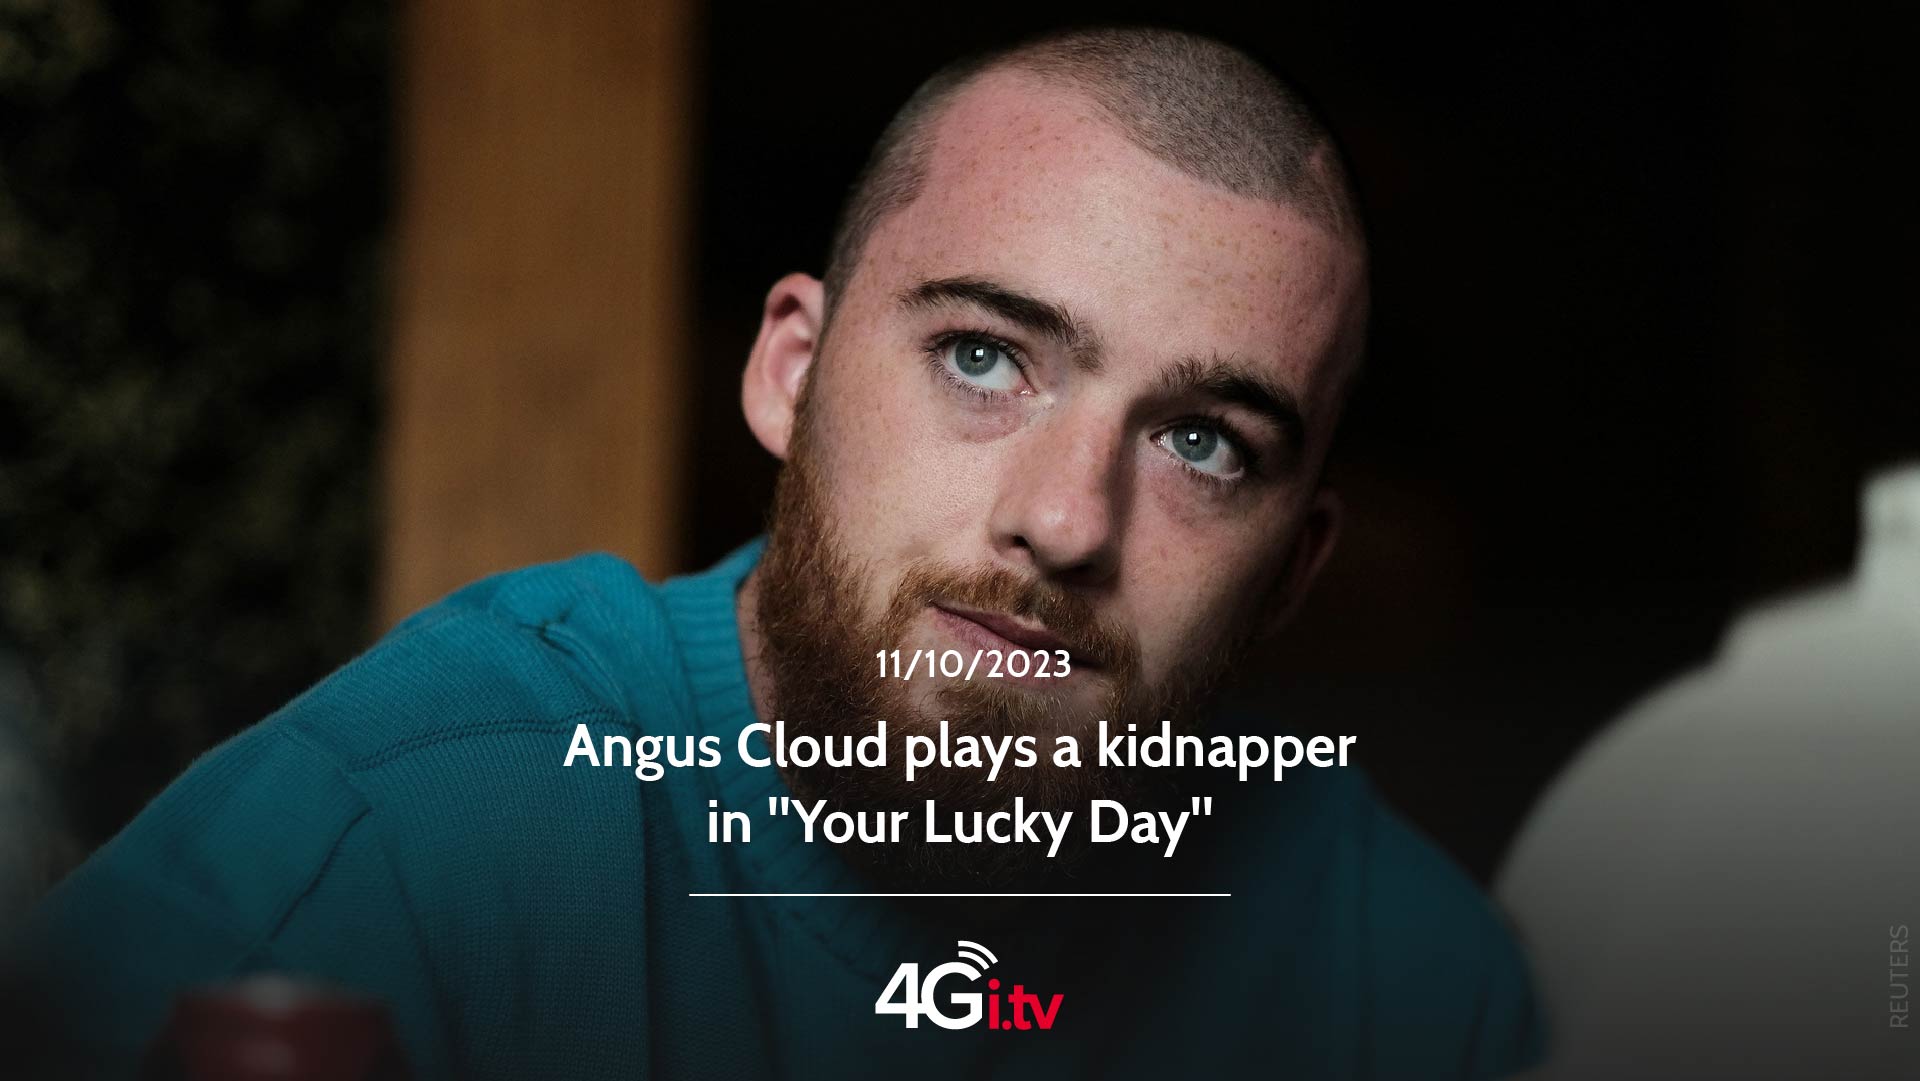 Подробнее о статье Angus Cloud plays a kidnapper in “Your Lucky Day”